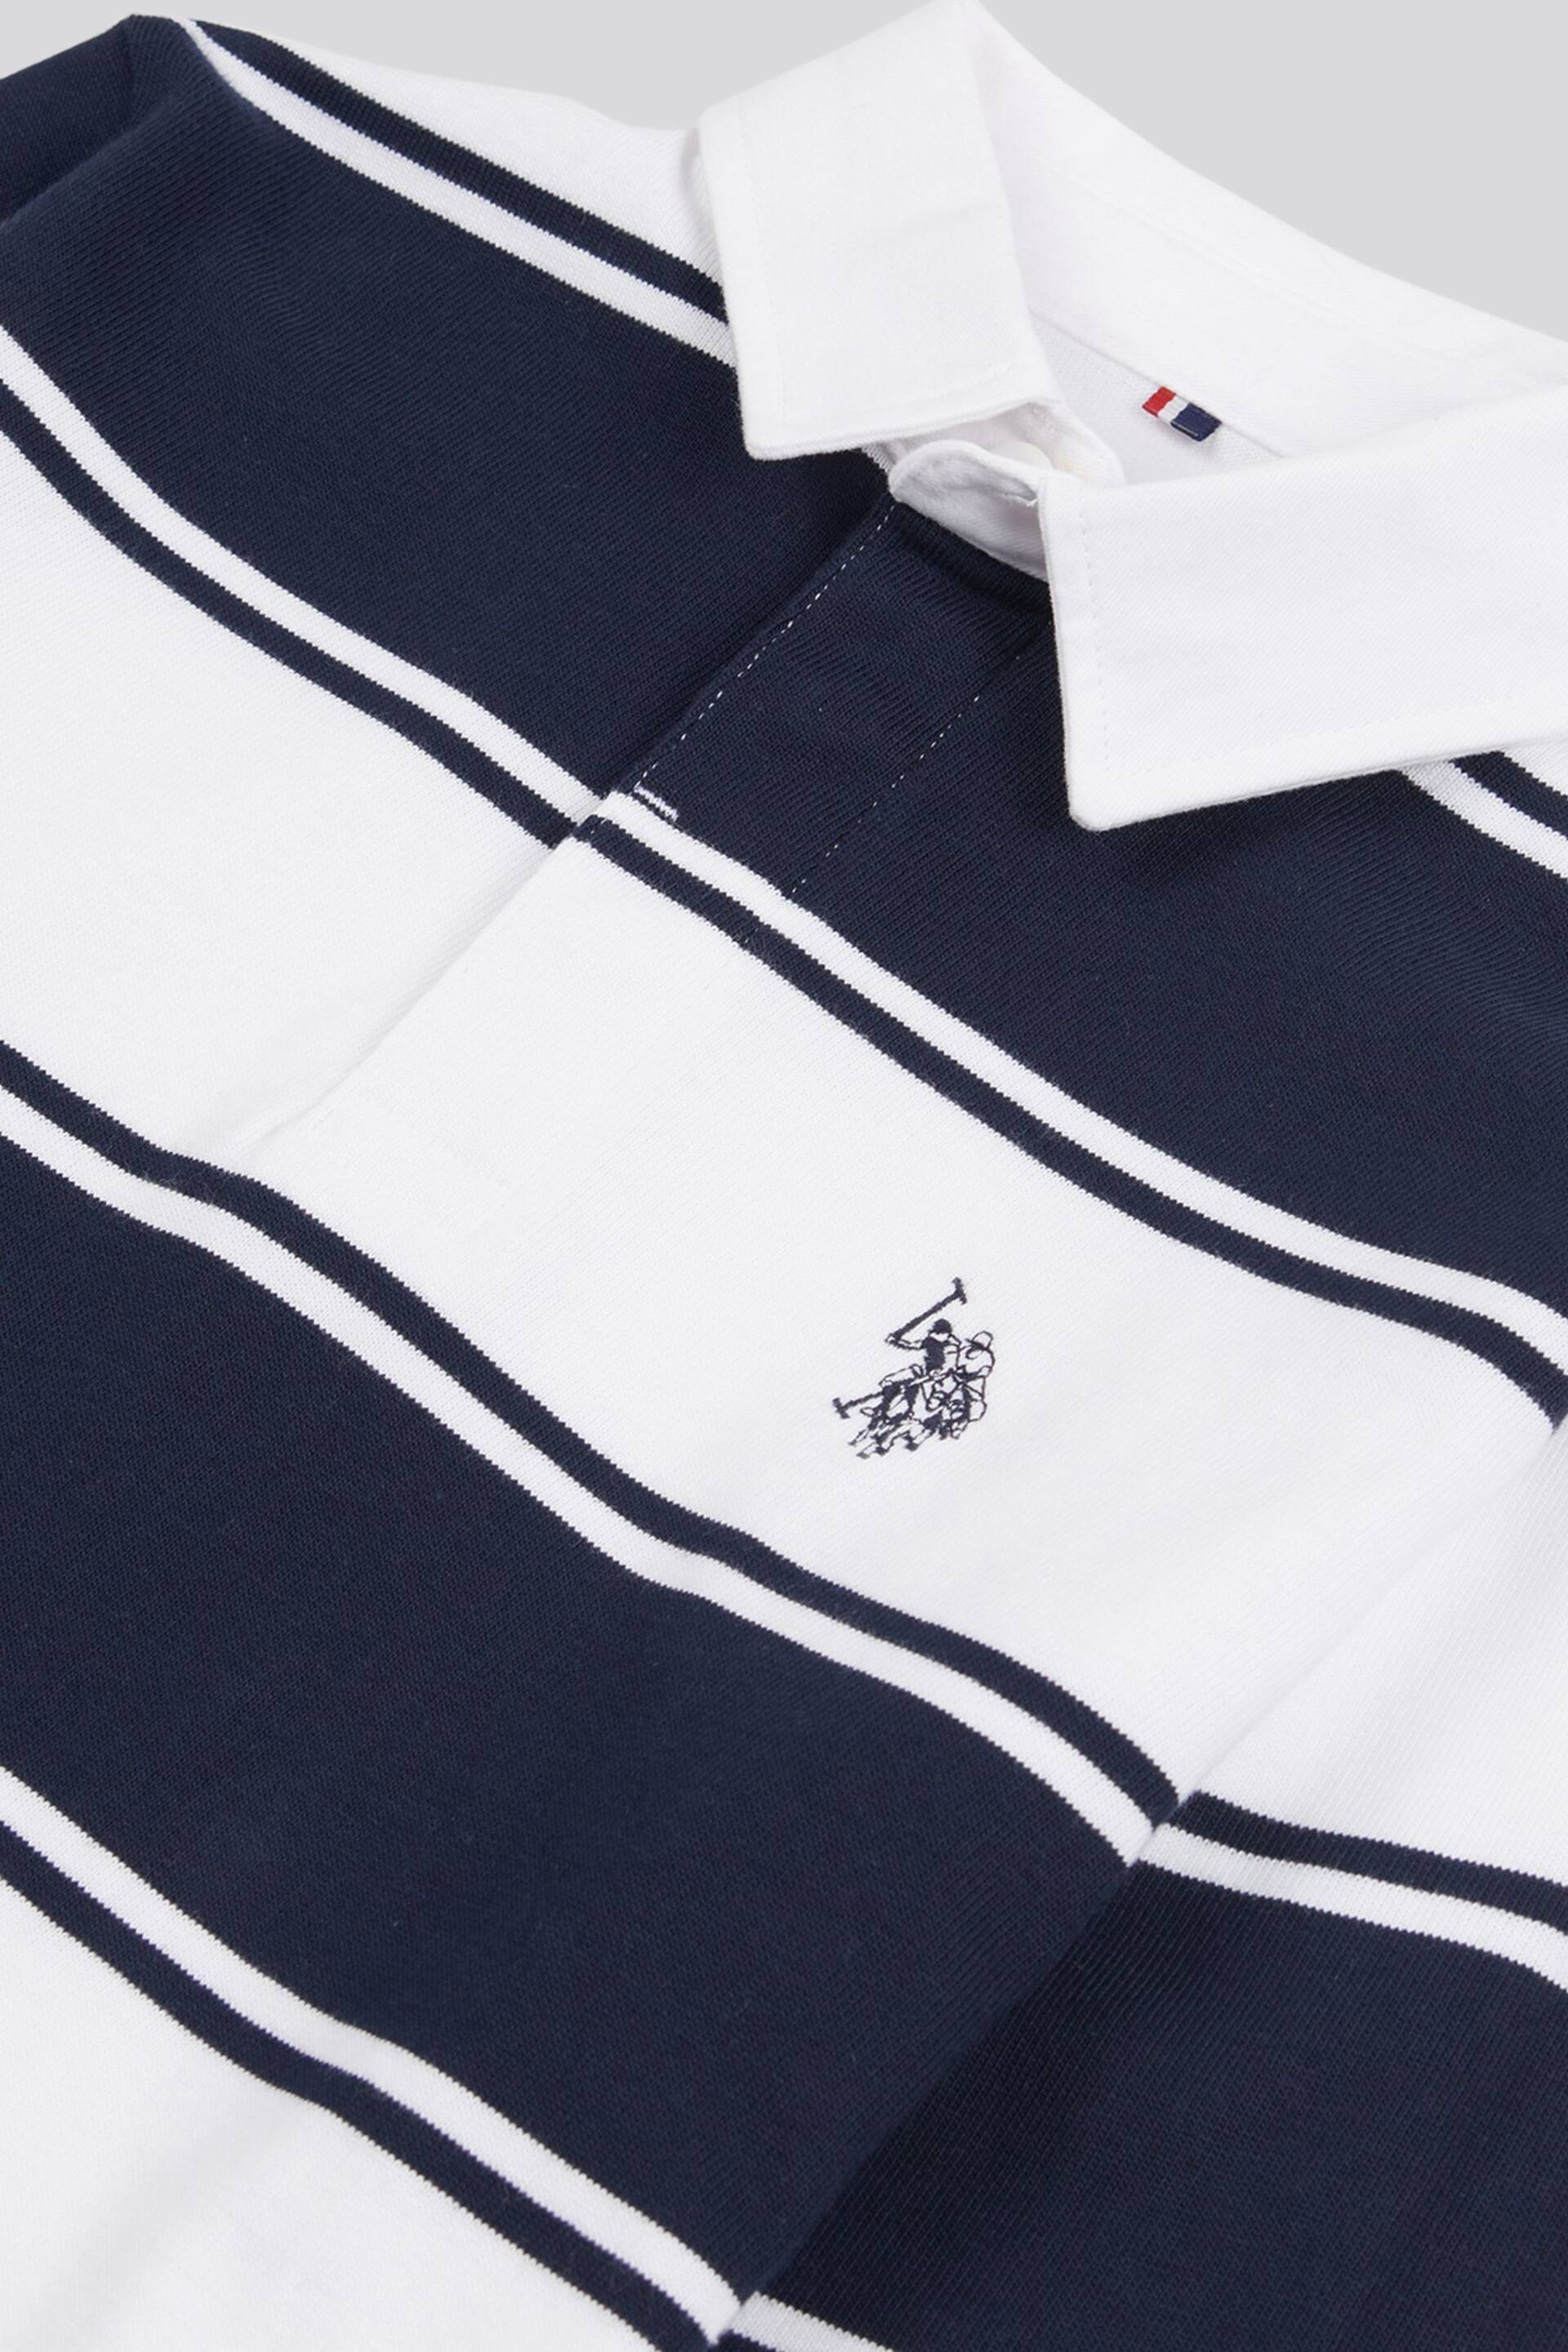 U.S. Polo Assn. Boys Striped Rugby White Shirt - Image 3 of 3